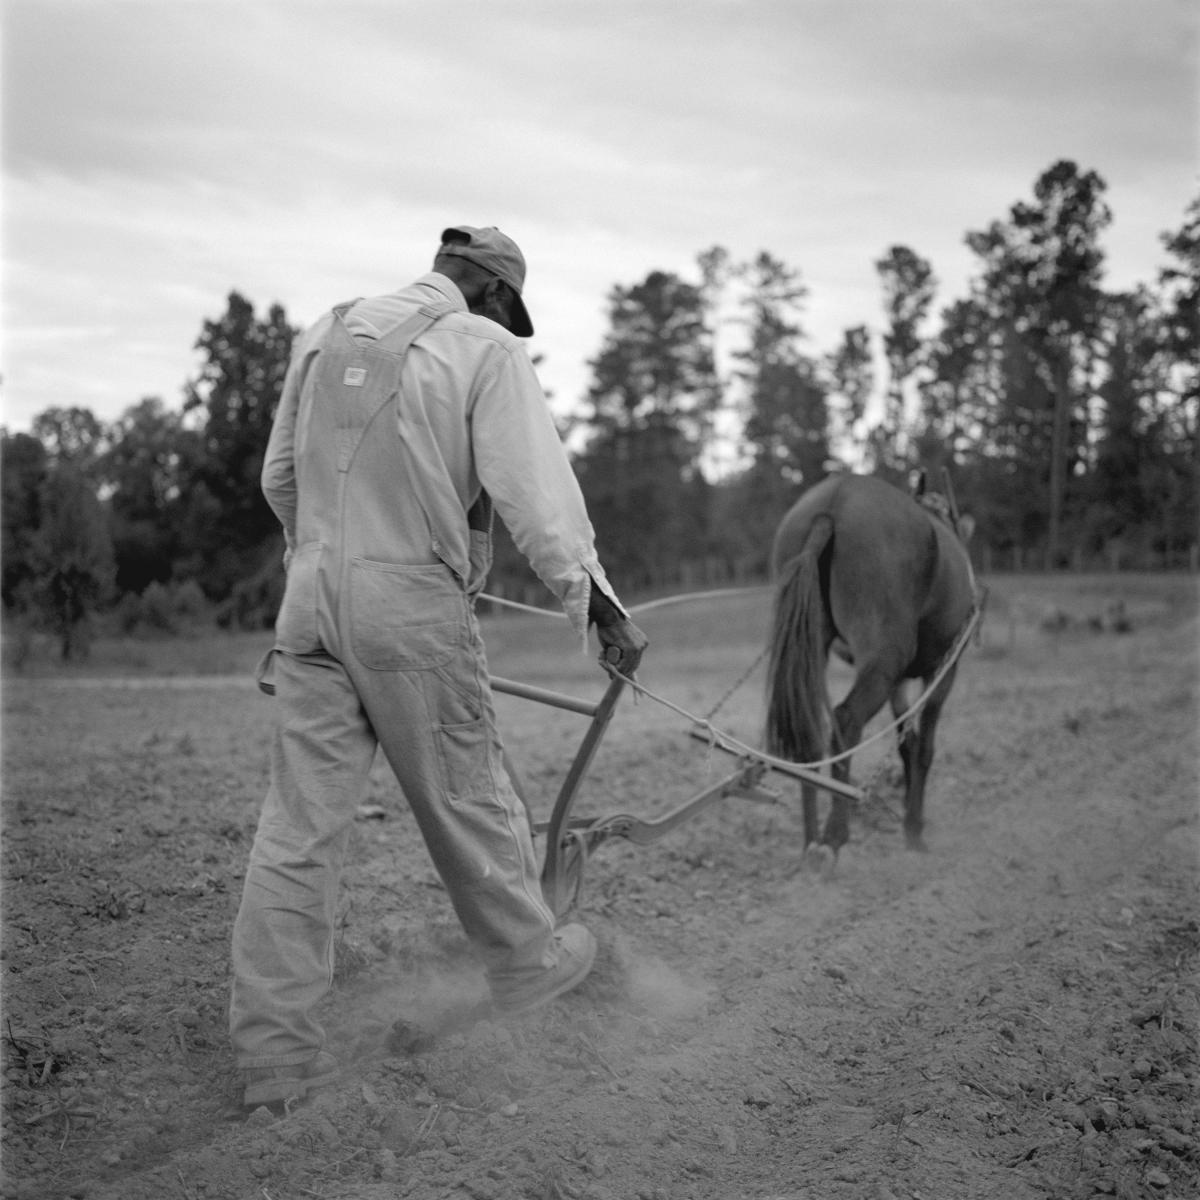 <p><center>Lee County, Alabama:</center></p>
Jerry Singleton plowing with "Tat" preparing his field for seeding. : Images : AMERICAN BLACK FARMERS PROJECT - John Ficara